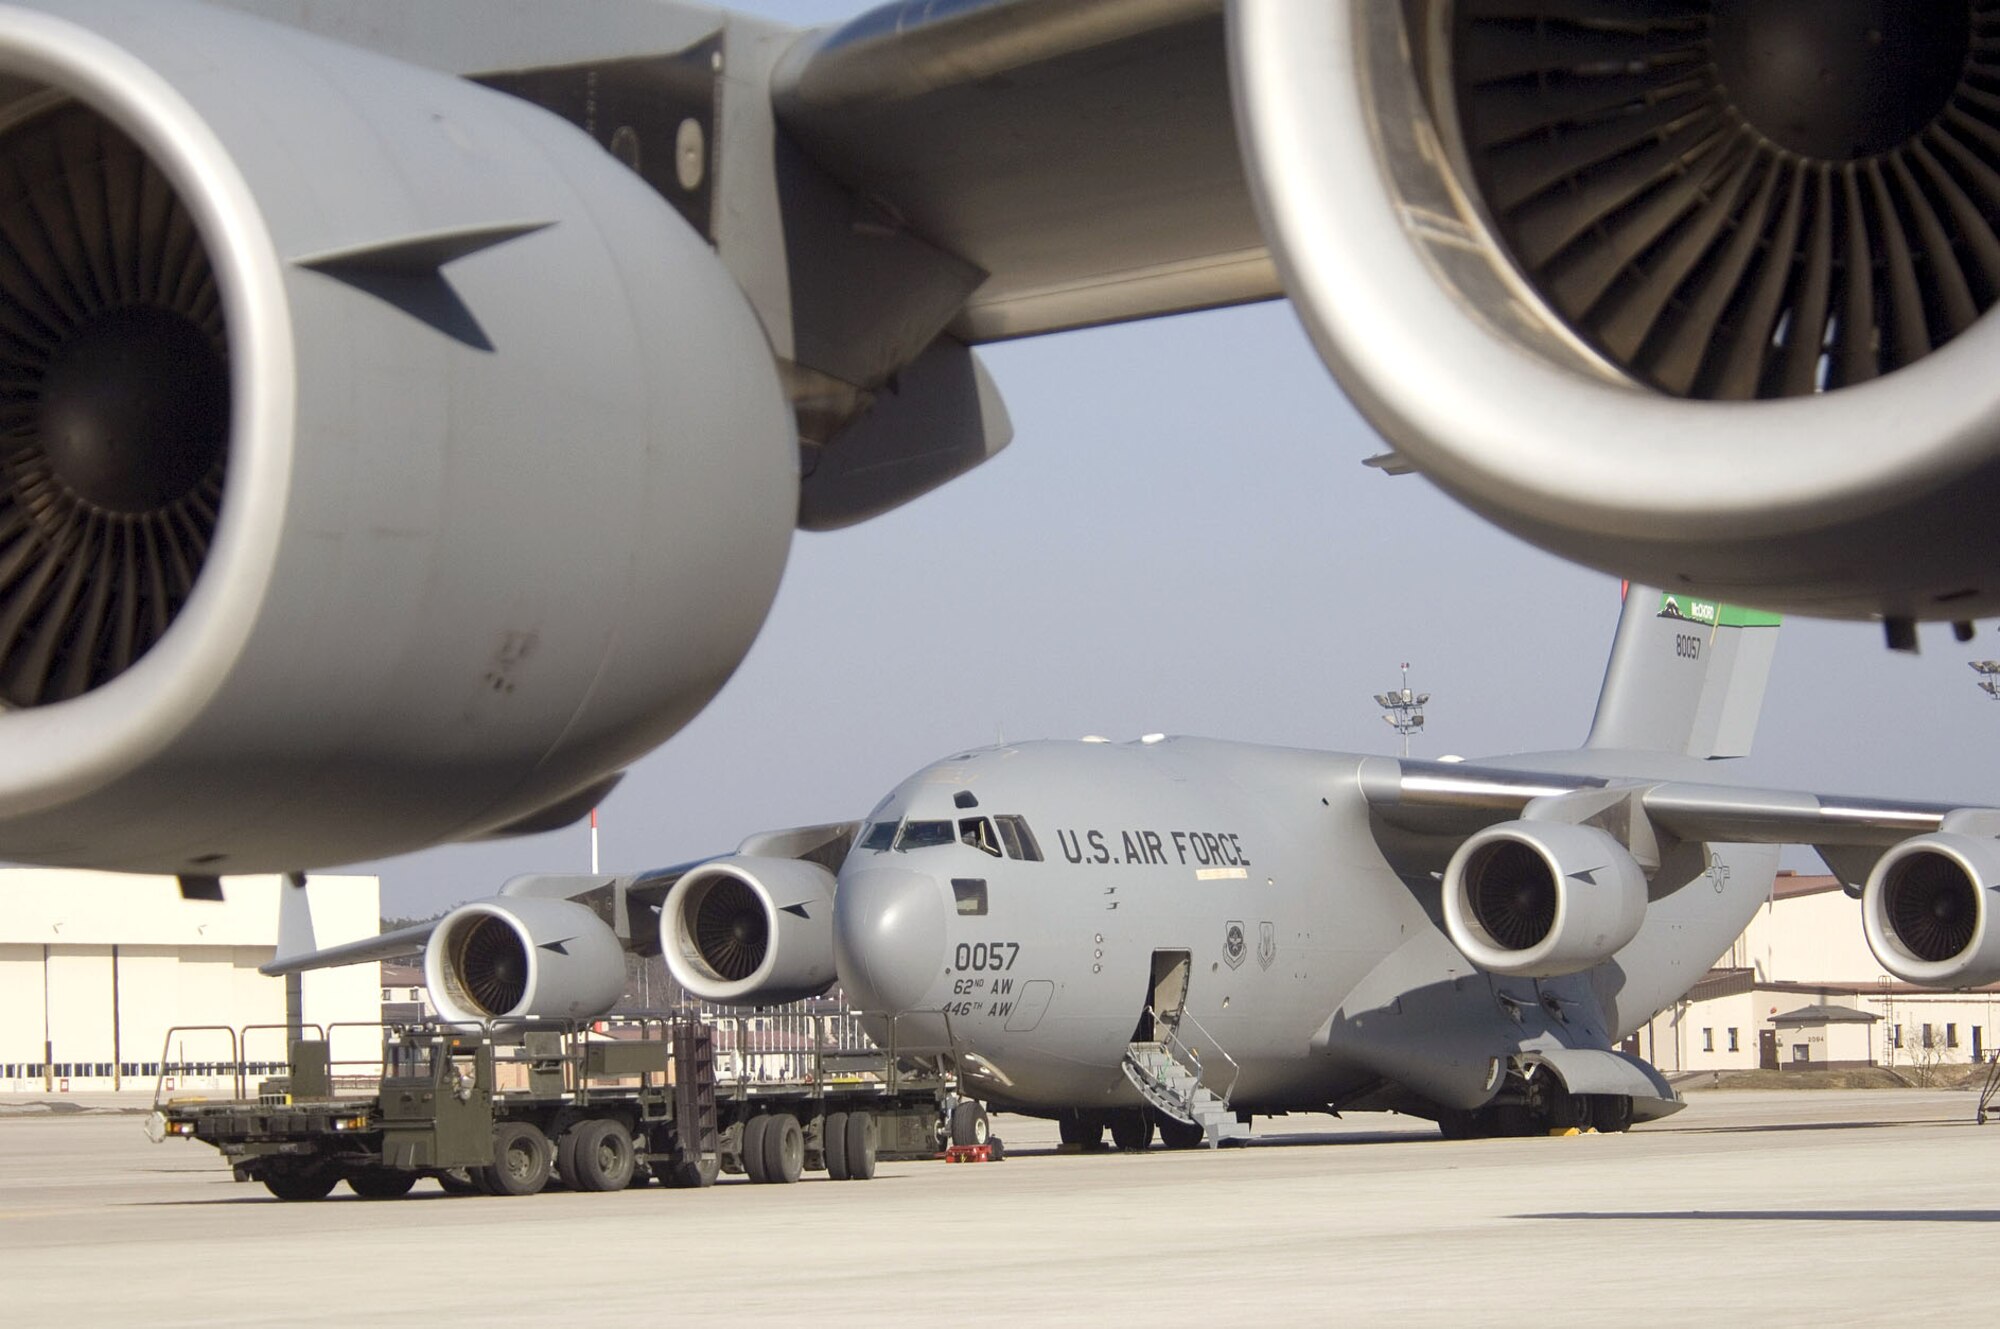 A C-17 Globemaster III awaits loading on the parking ramp at Ramstein Air Base, Germany, on Sunday, March 19, 2006. The transport, from McChord Air Force Base, Wash., helps a fleet of Air Force cargo planes move troops and cargo from stateside bases to Iraq and Afghanistan. (U.S. Air Force photo/Master Sgt. John E. Lasky) 